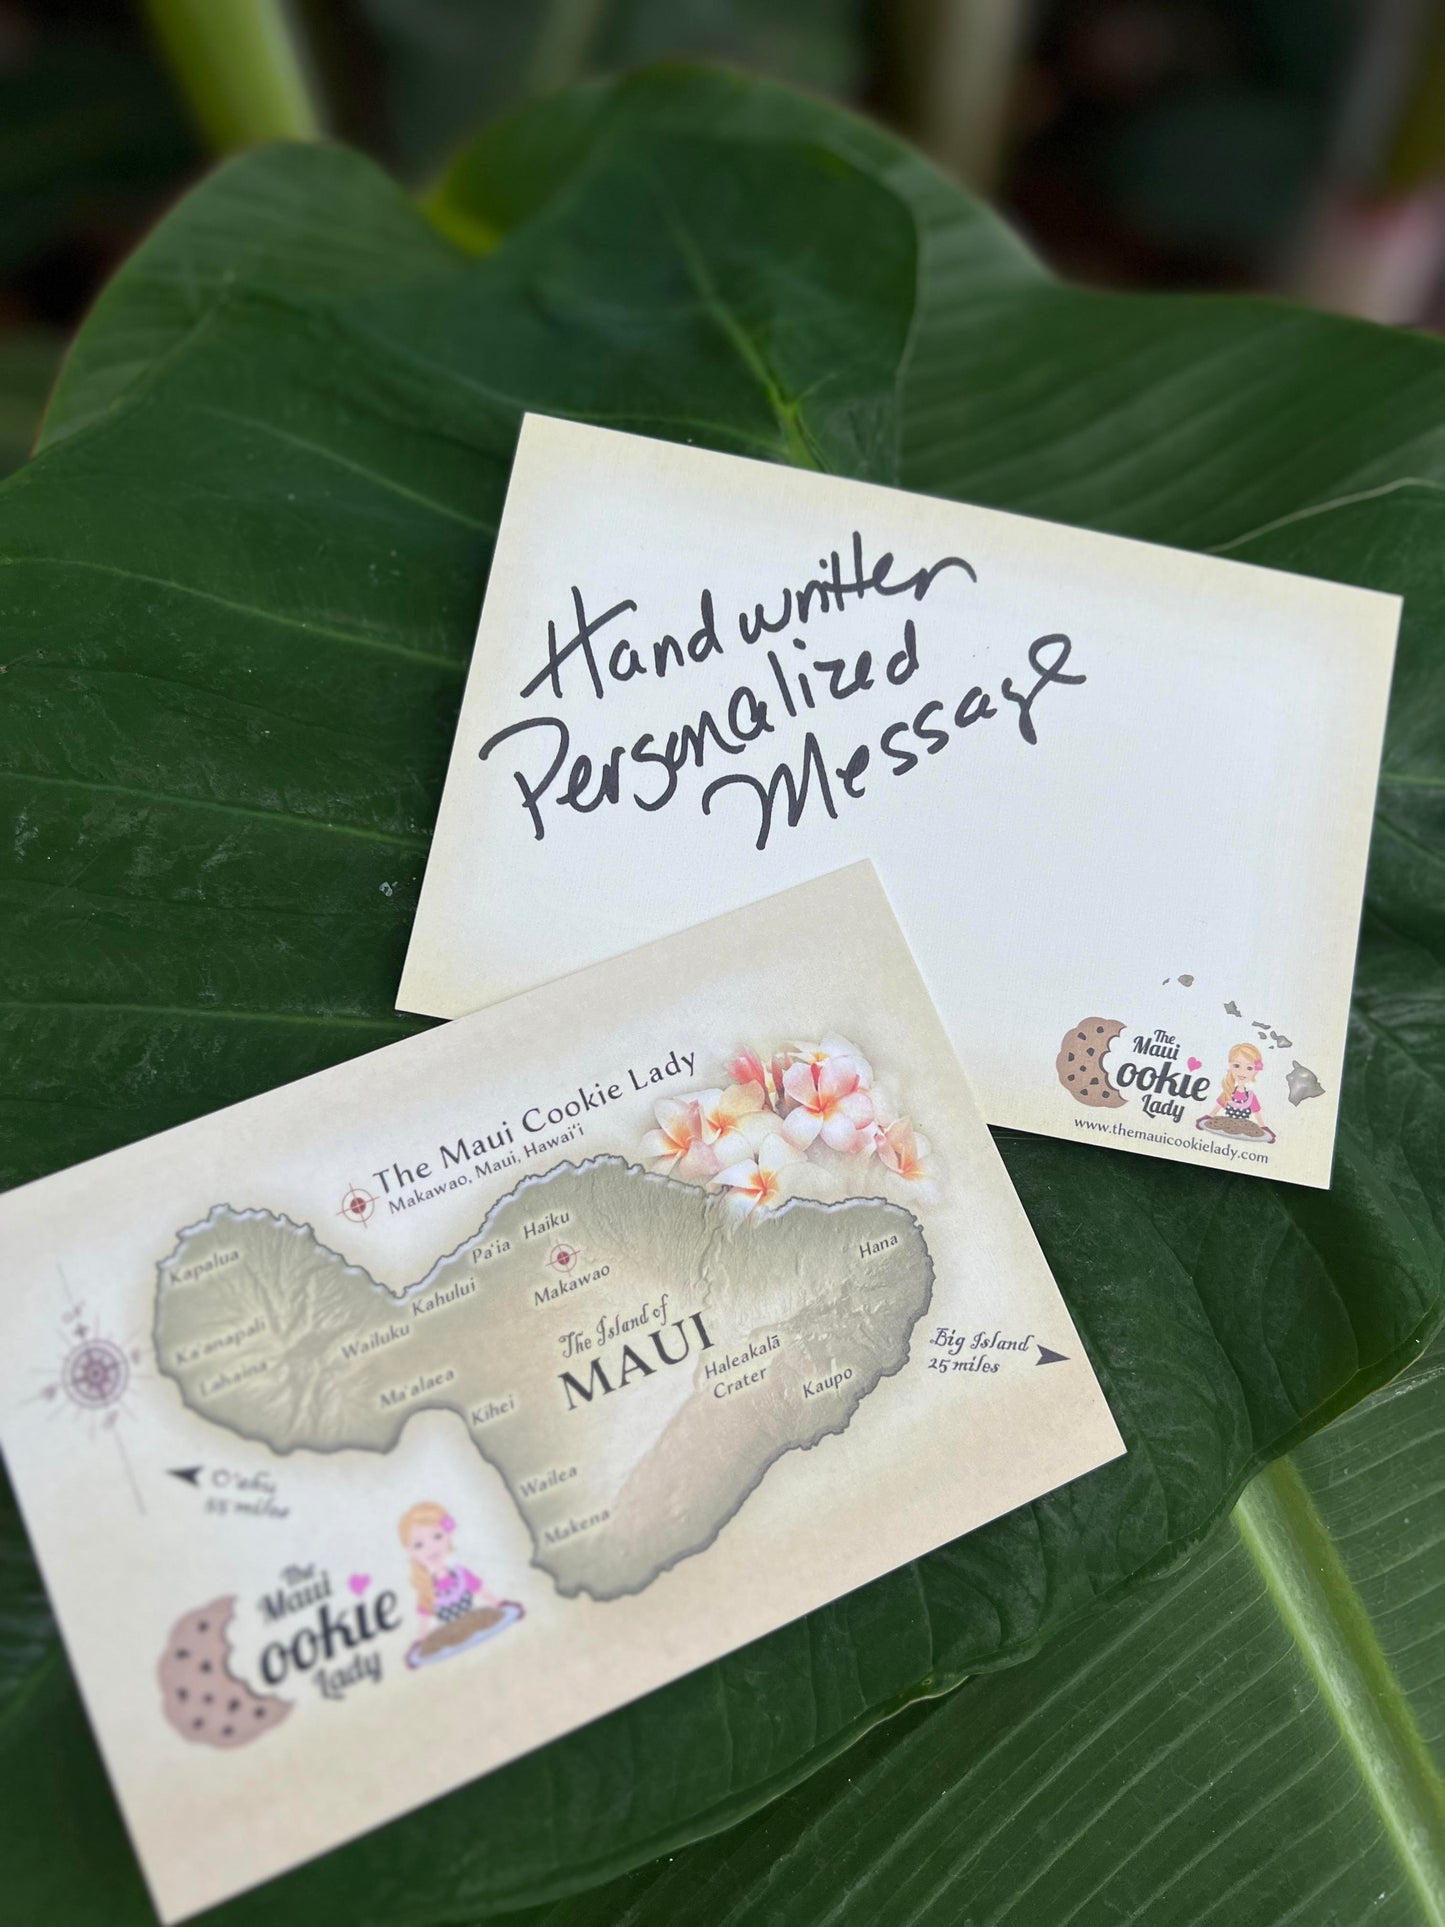 Card- Personalized Hand Written Message on a Beautiful Maui Vintage Map